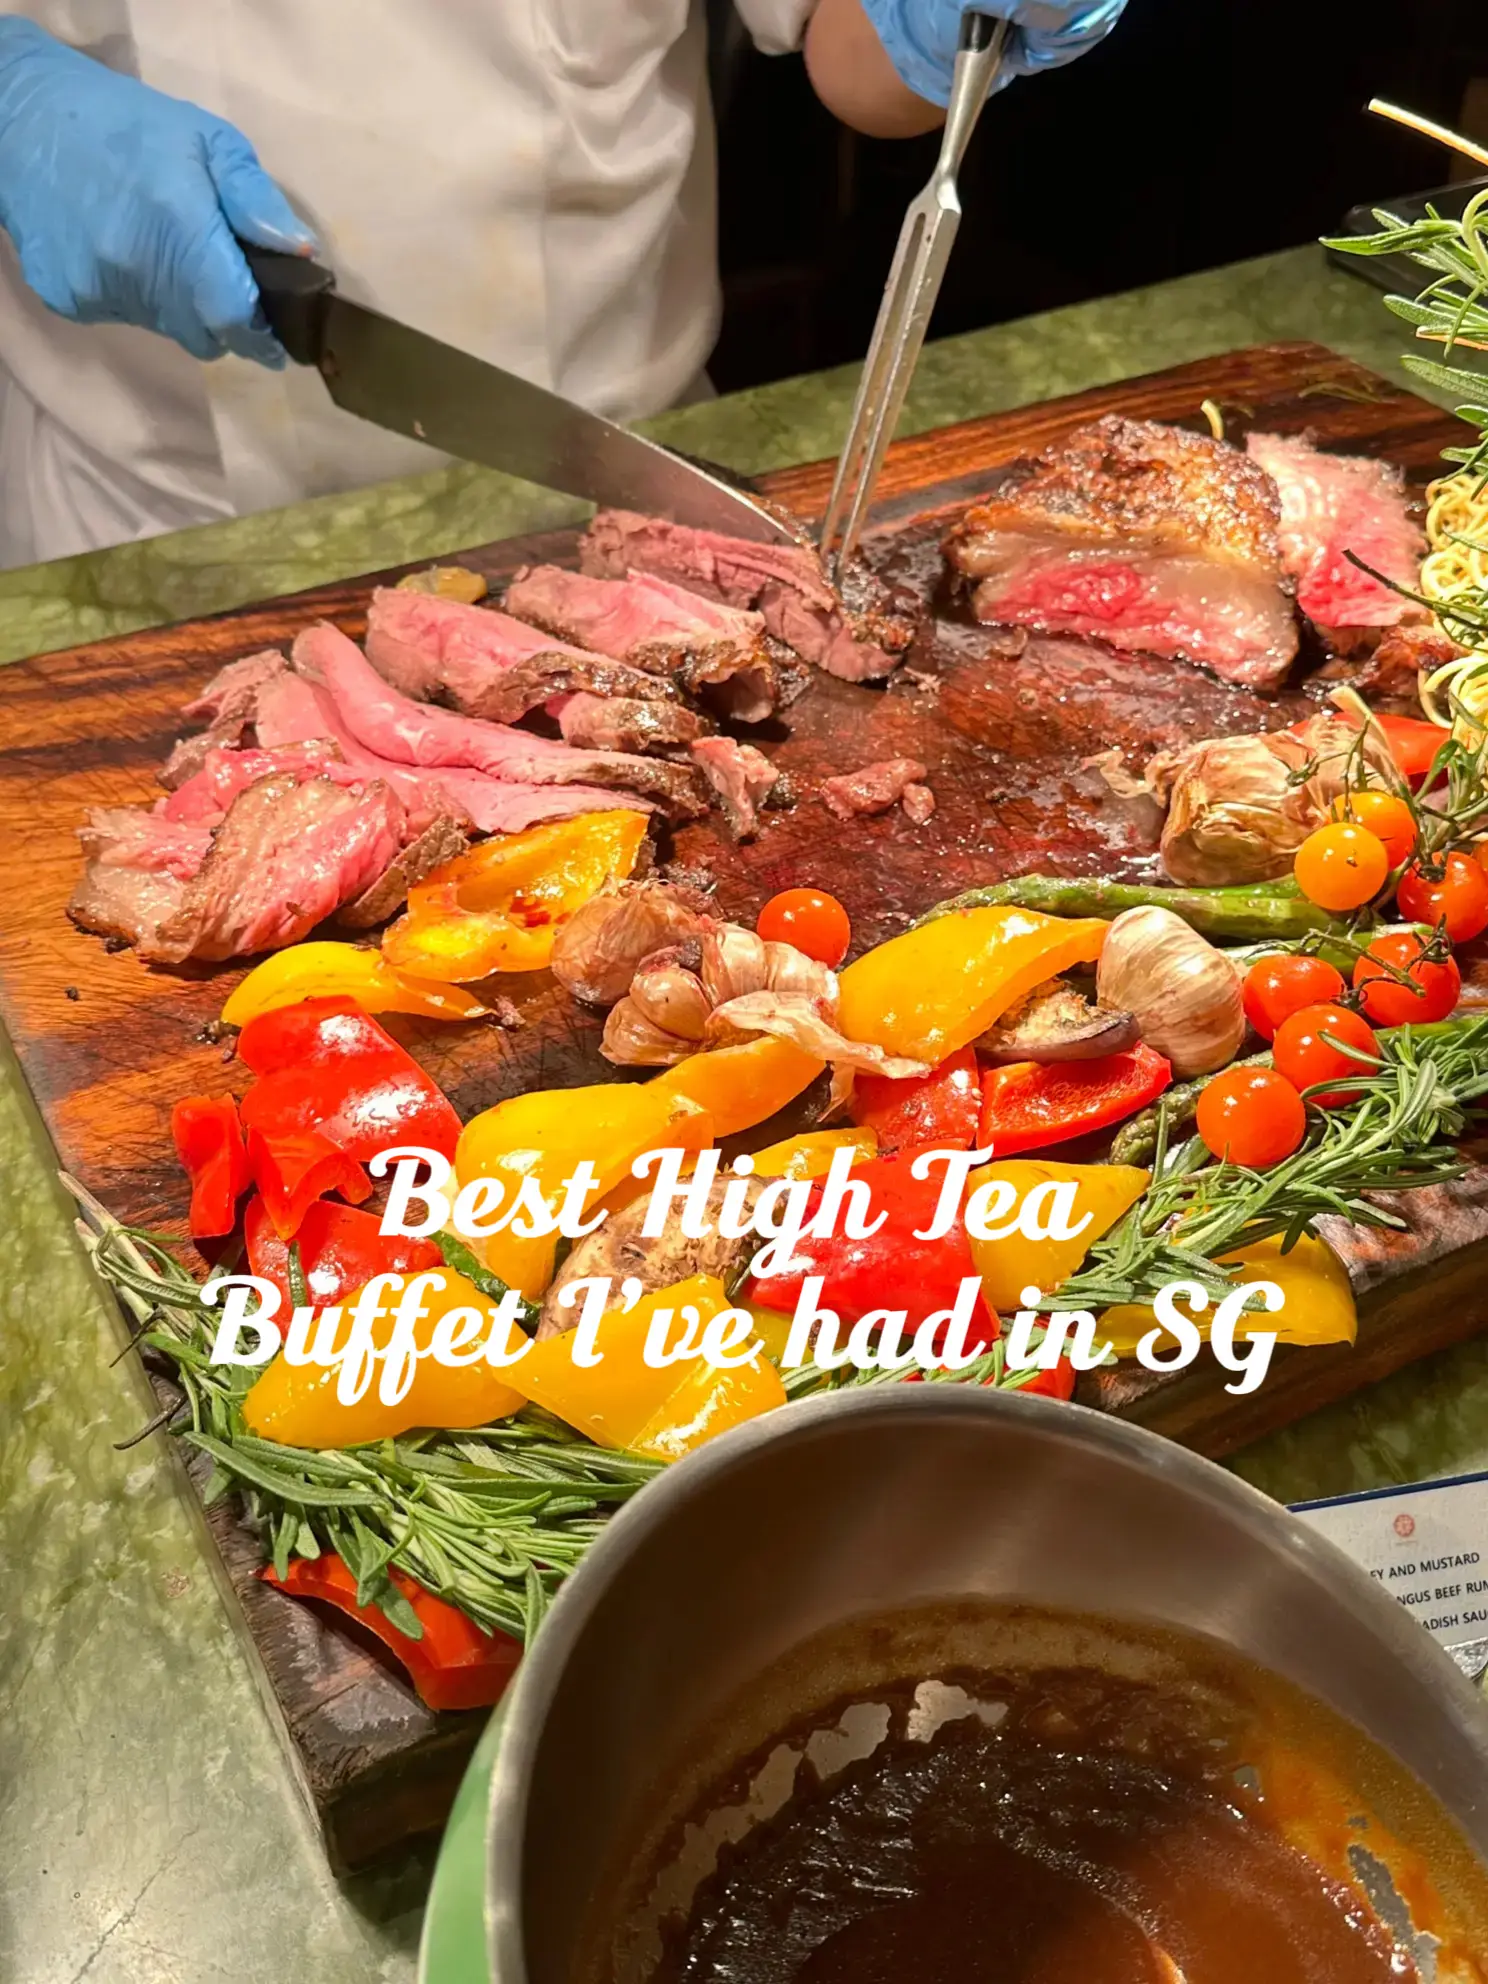 Don’t sleep on this High Tea Buffet in SG🤤's images